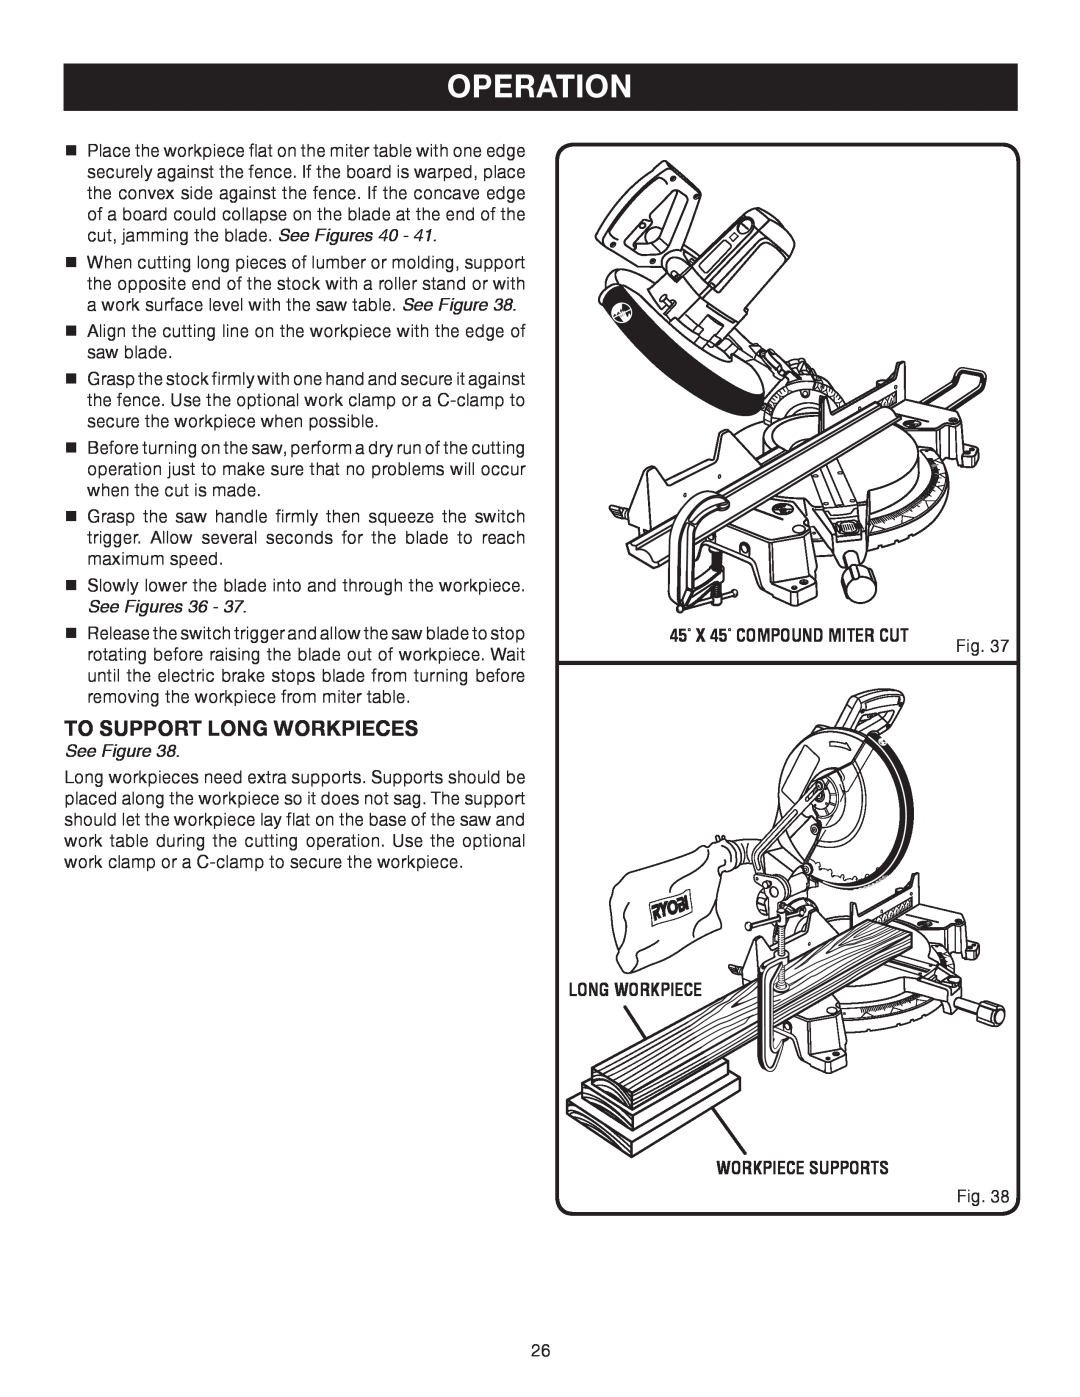 Ryobi TS1552DXL manual To Support Long Workpieces, Operation, See Figures 36, 45 X 45 COMPOUND MITER CUT 